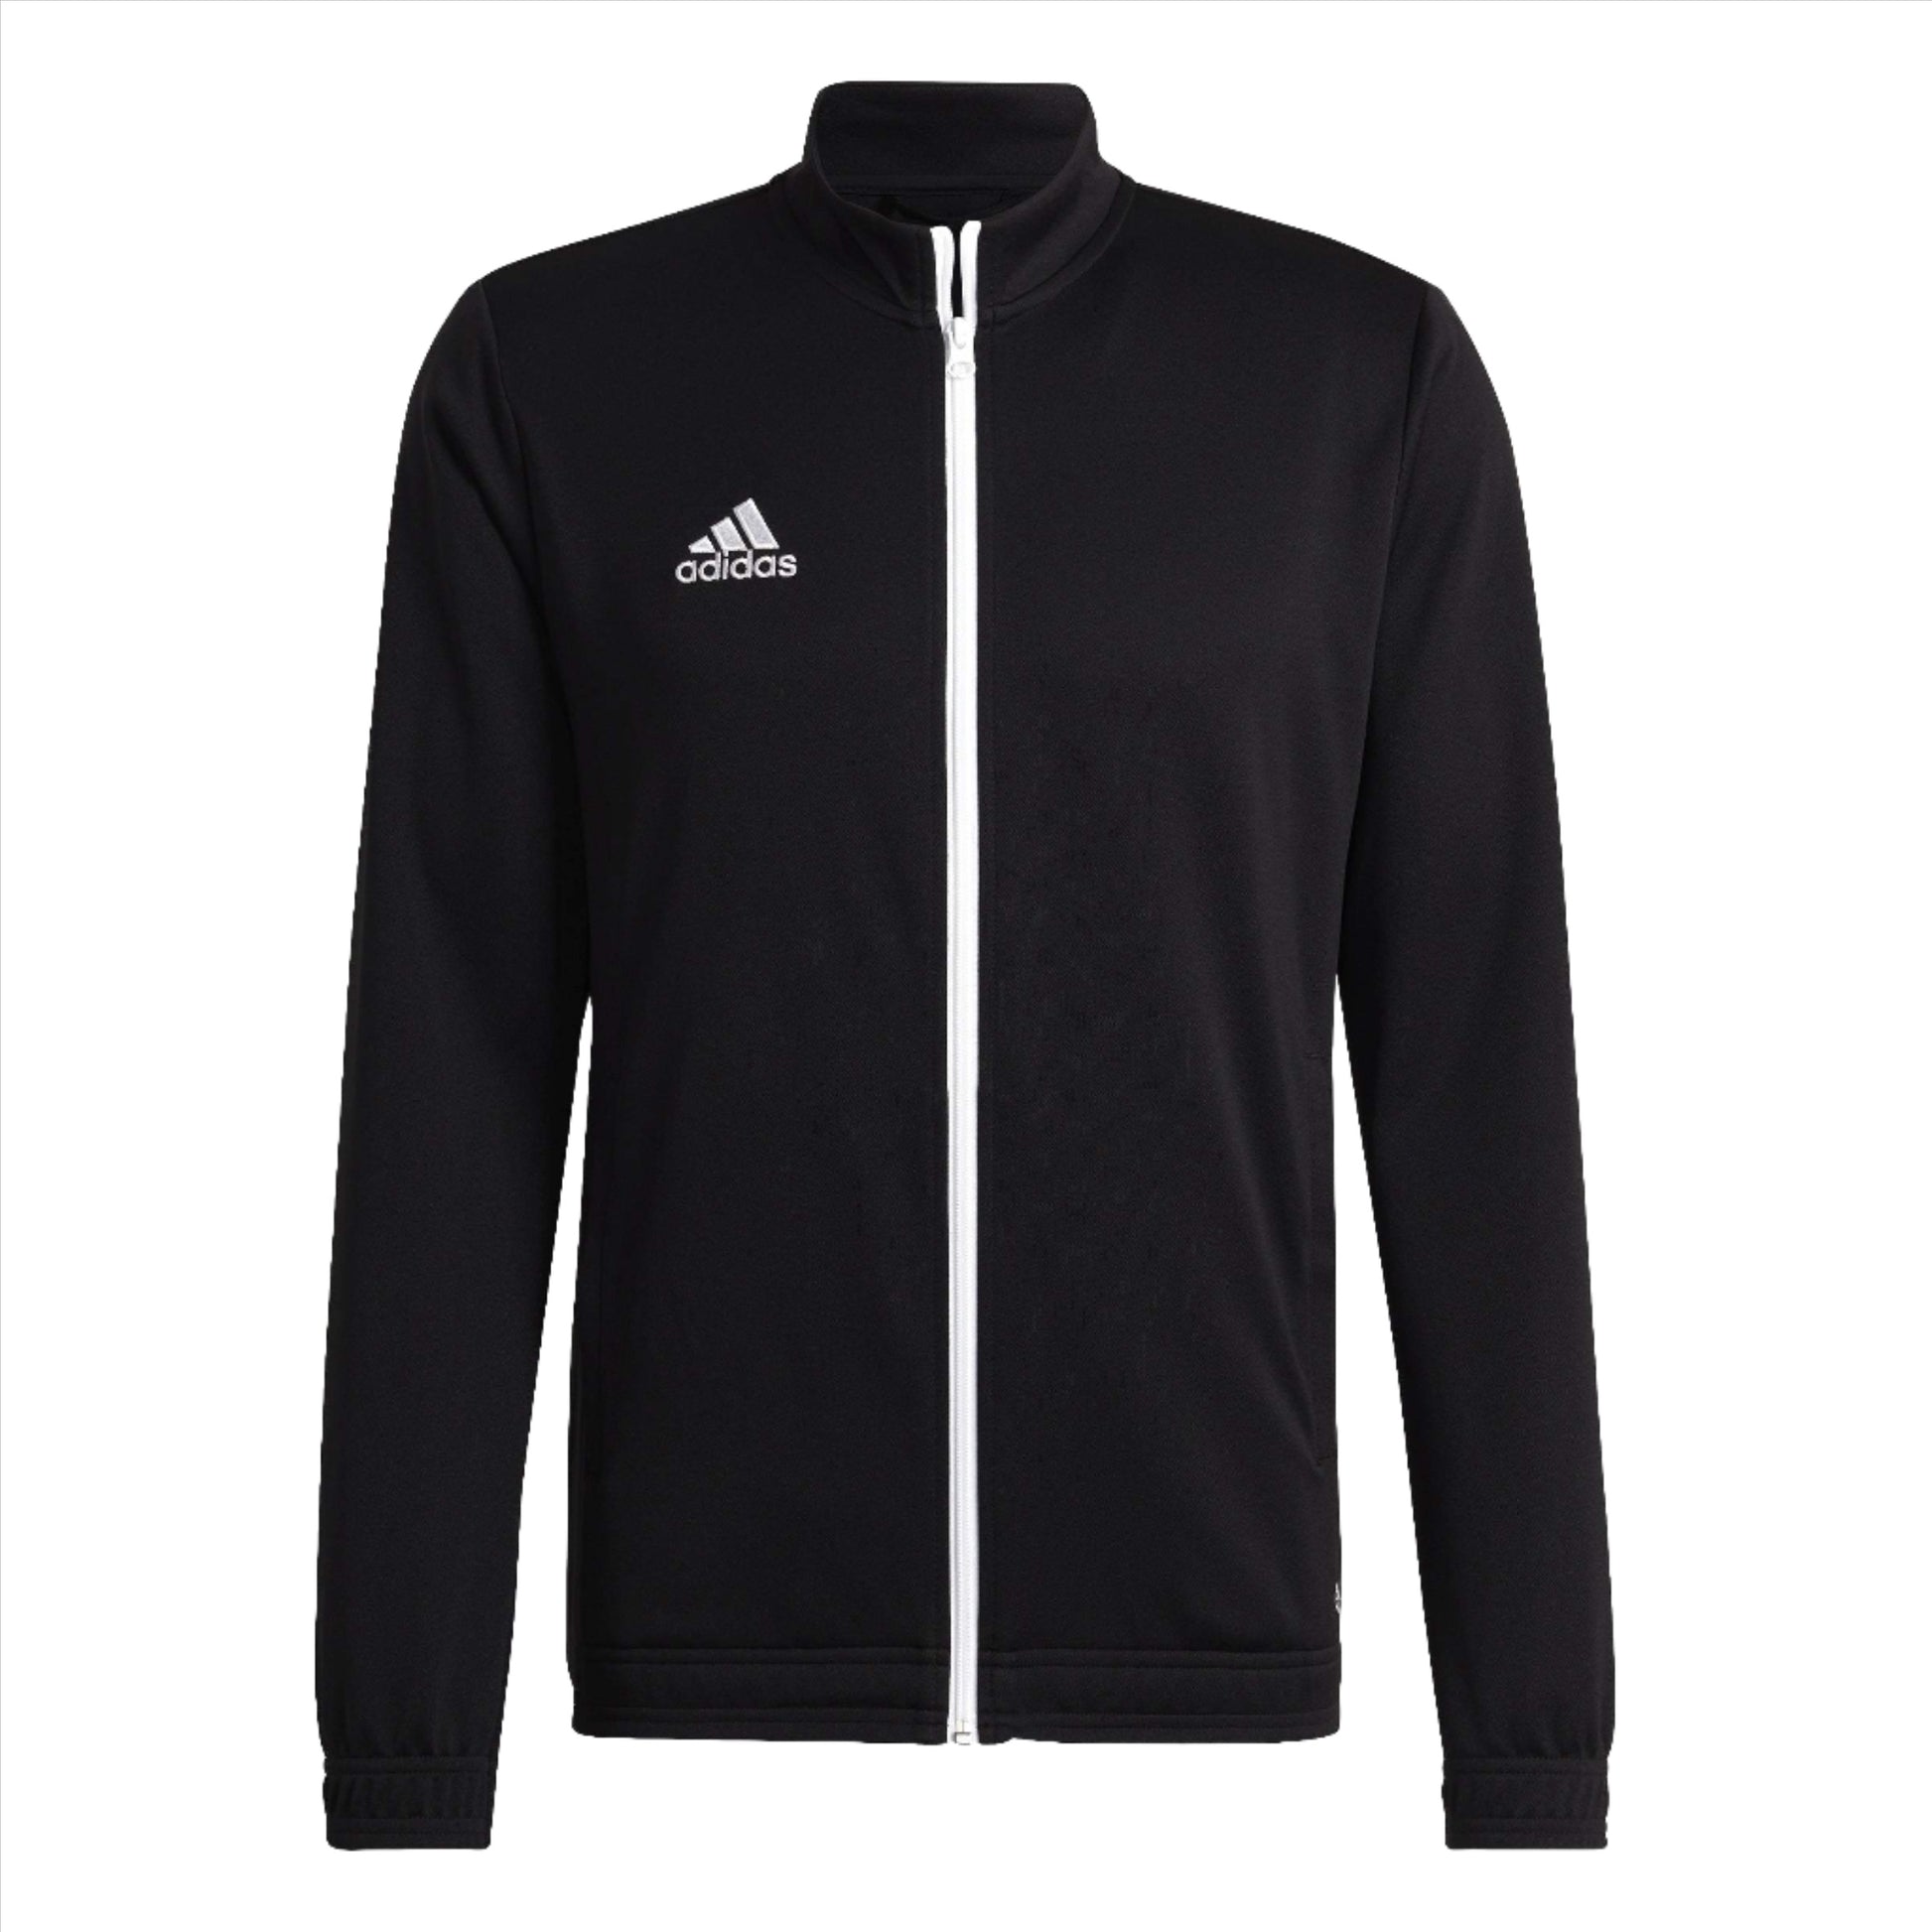 Entrada 22 Track Jacket by Adidas - The Luxury Promotional Gifts Company Limited